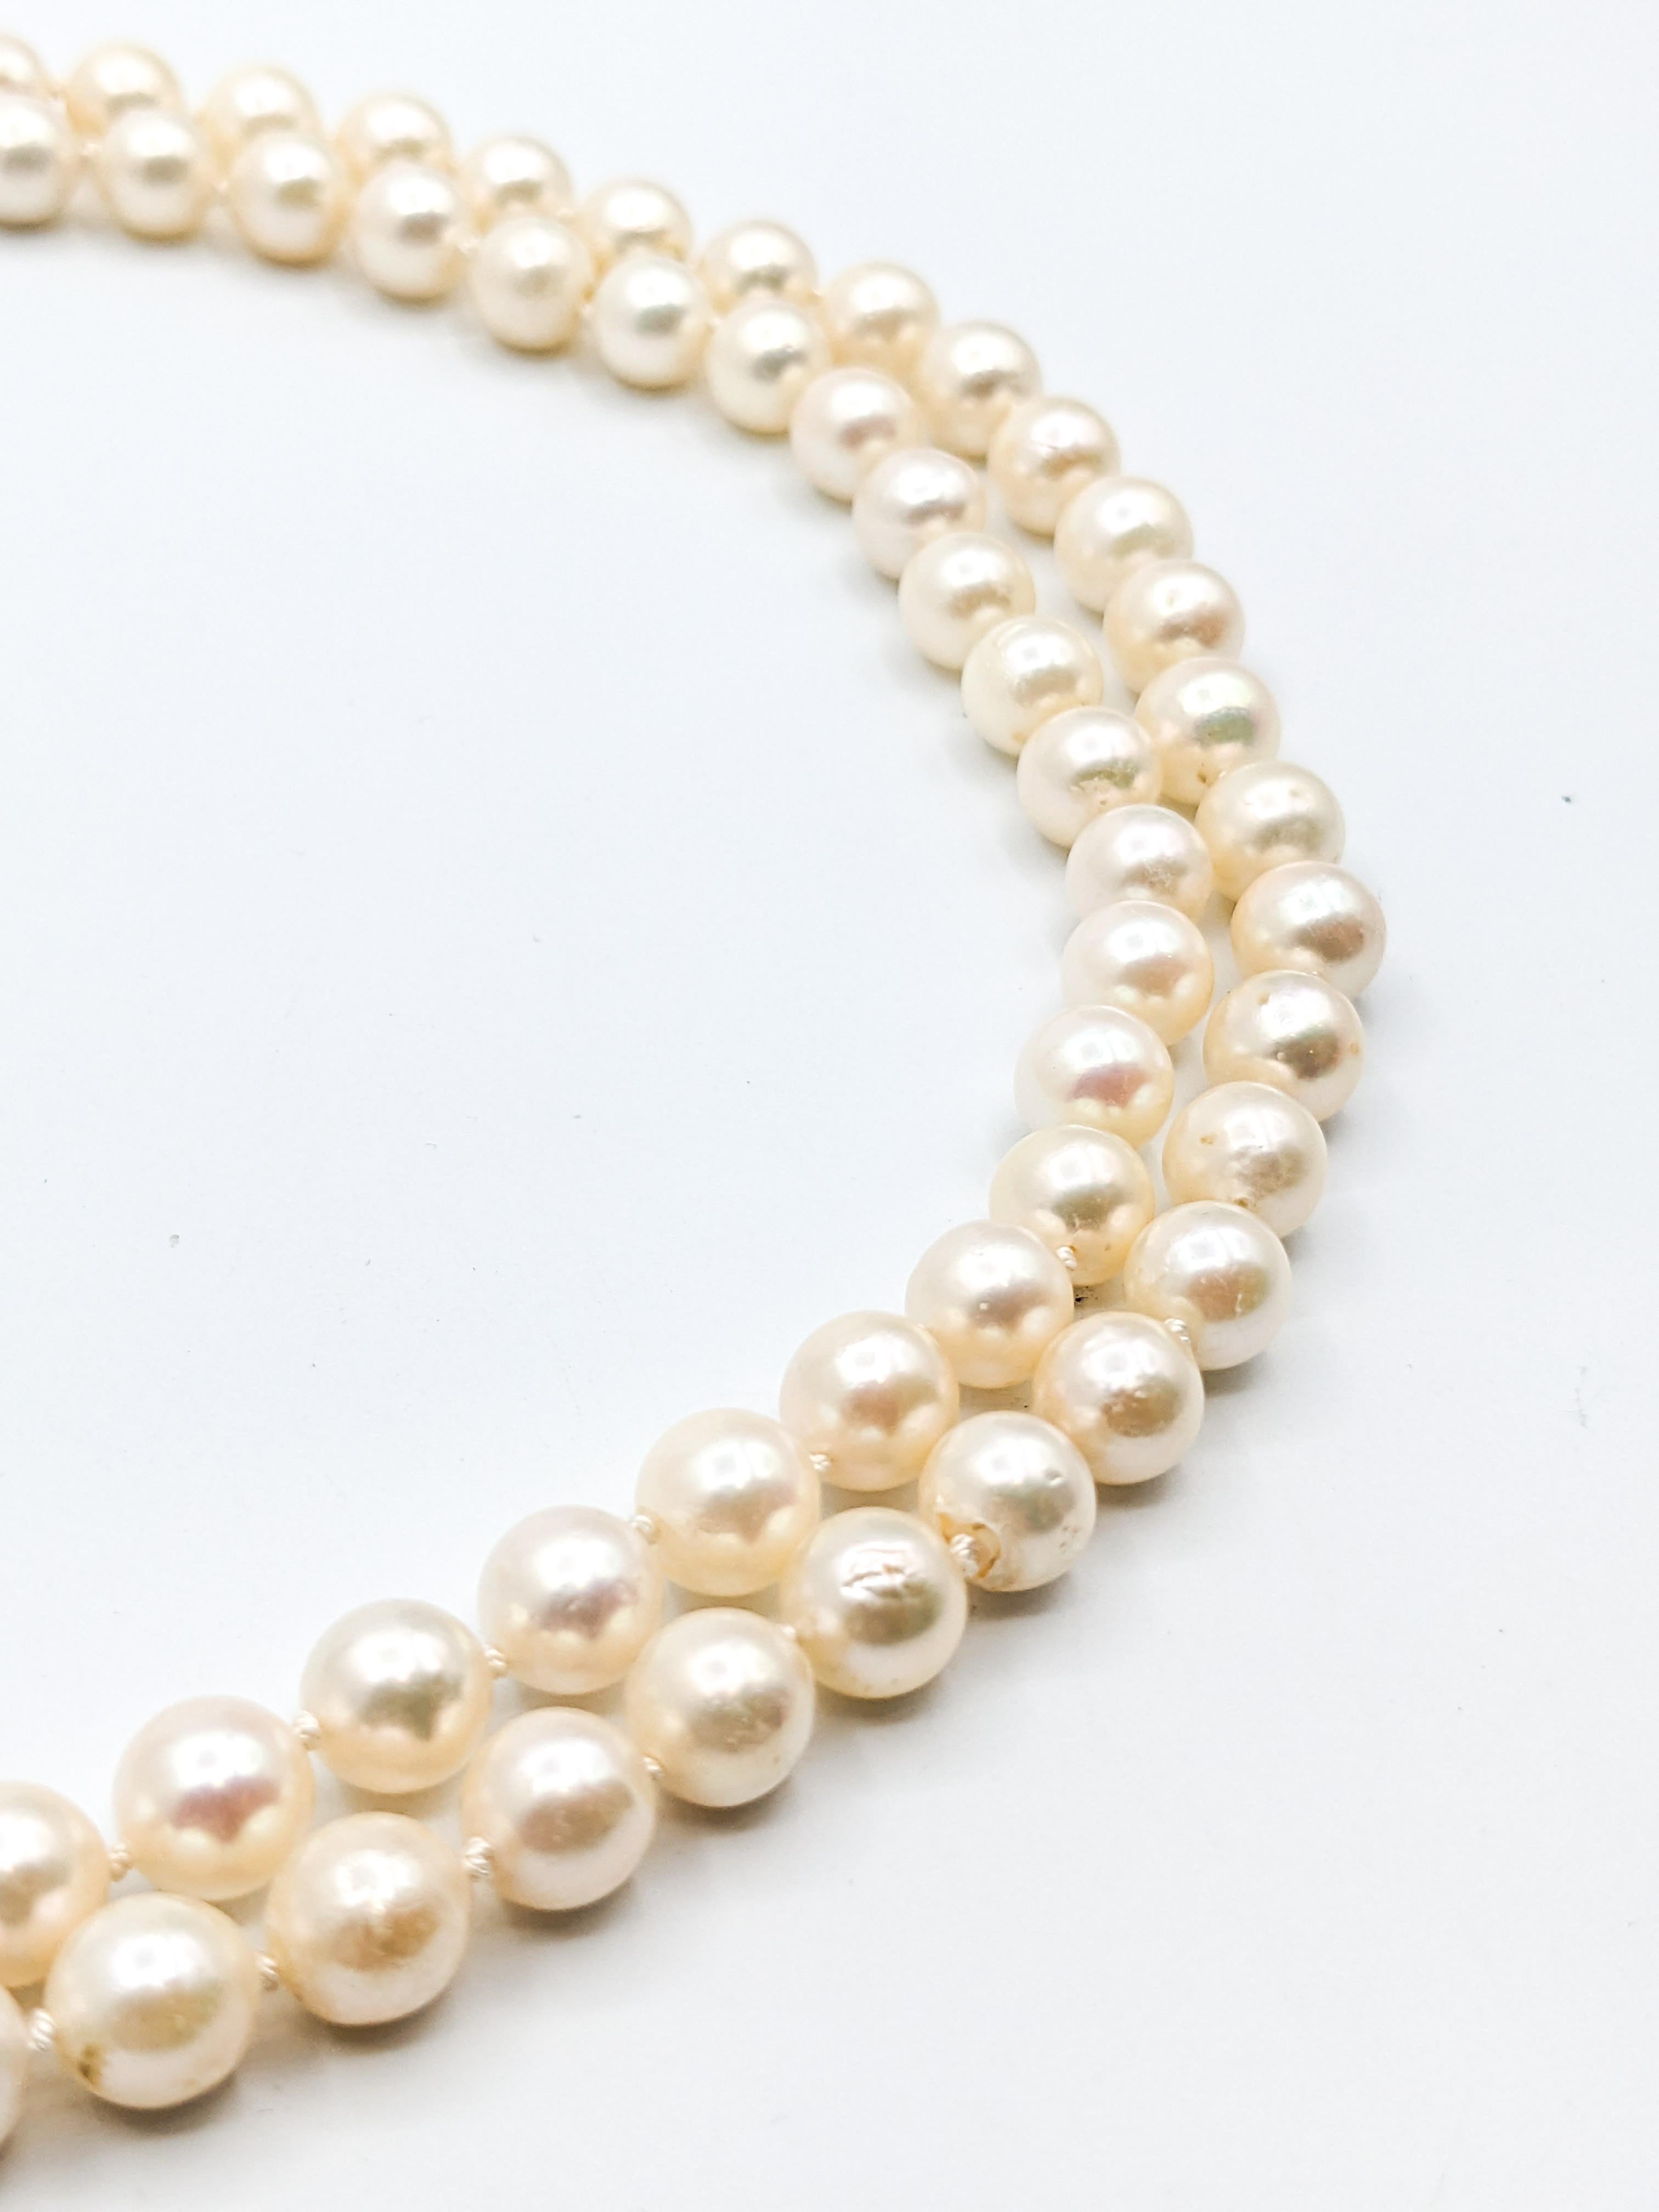 Timeless 7.55mm Akoya Pearl 37 inch Strand Necklace

Adorn yourself in timeless elegance with our exquisite Akoya pearl necklace, masterfully crafted in the warm glow of 14k yellow gold. This captivating strand features lustrous 7.5mm Akoya pearls,